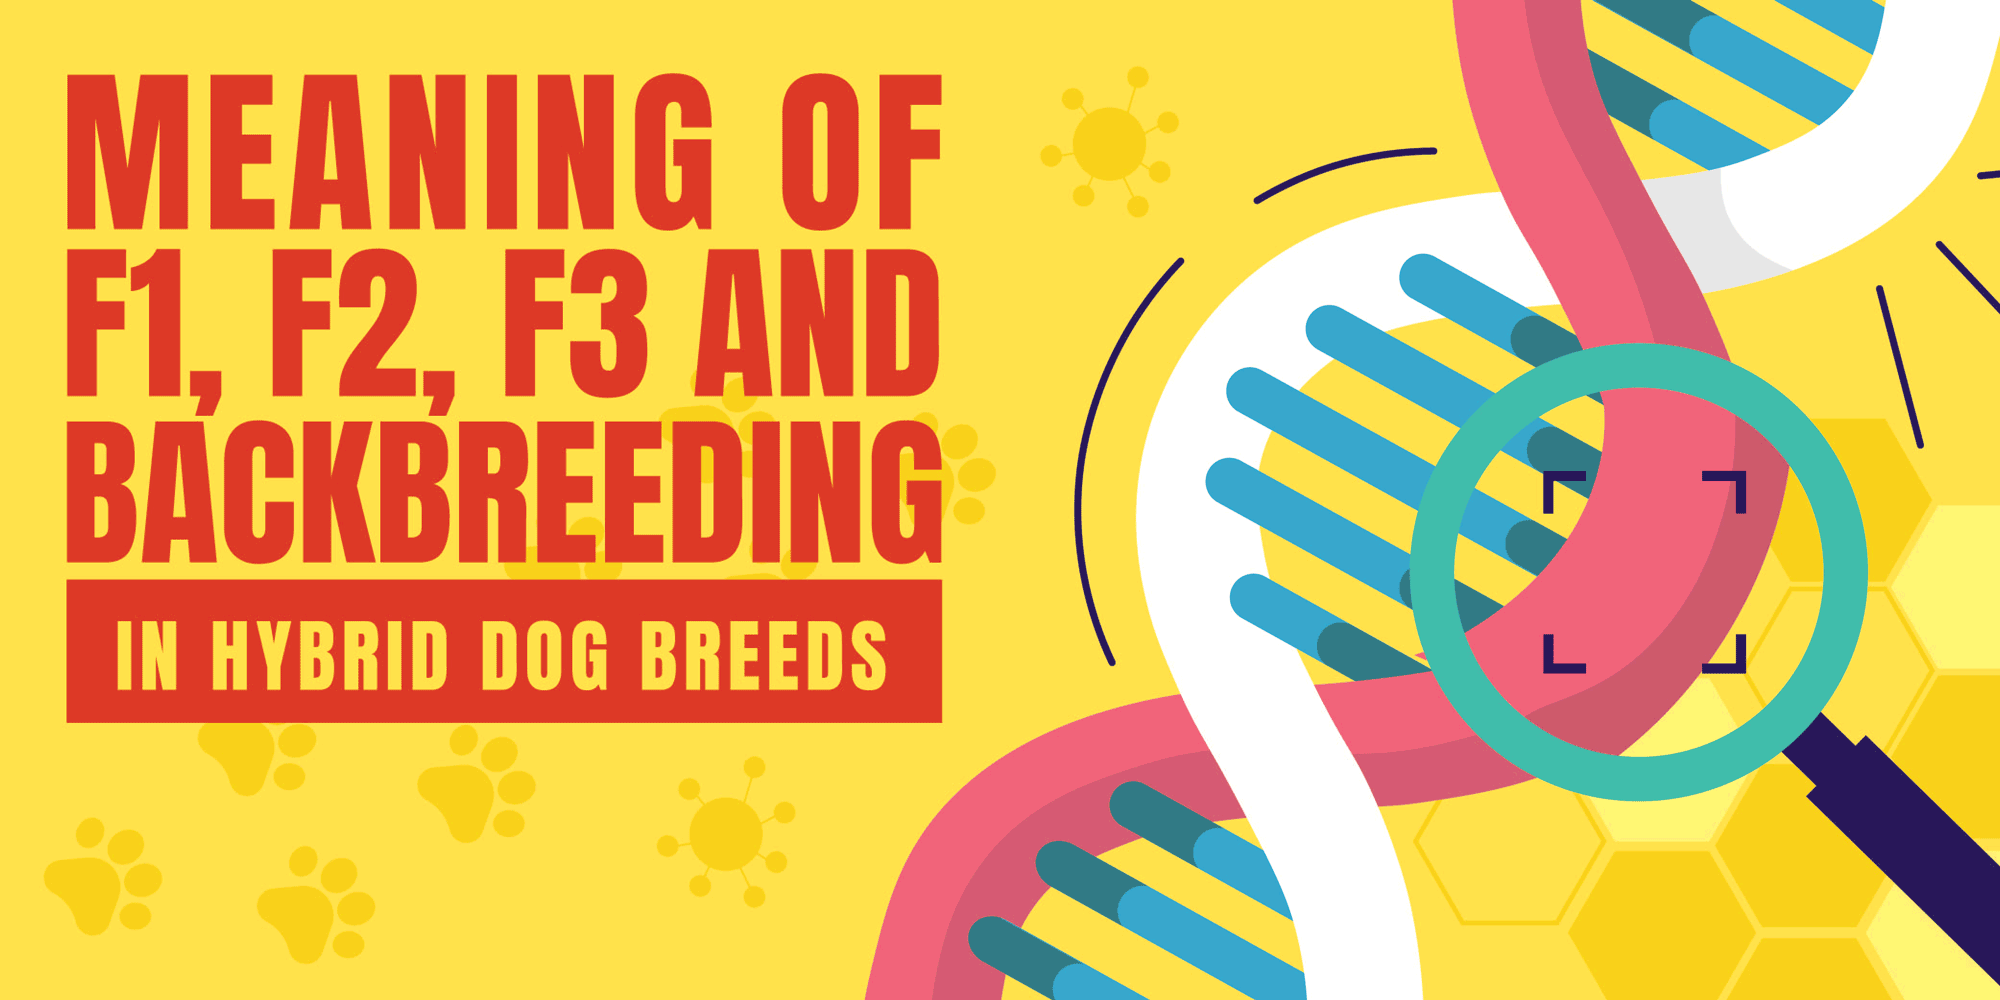 Meaning of F1, F1b, F2, F3... in crossbred dogs.